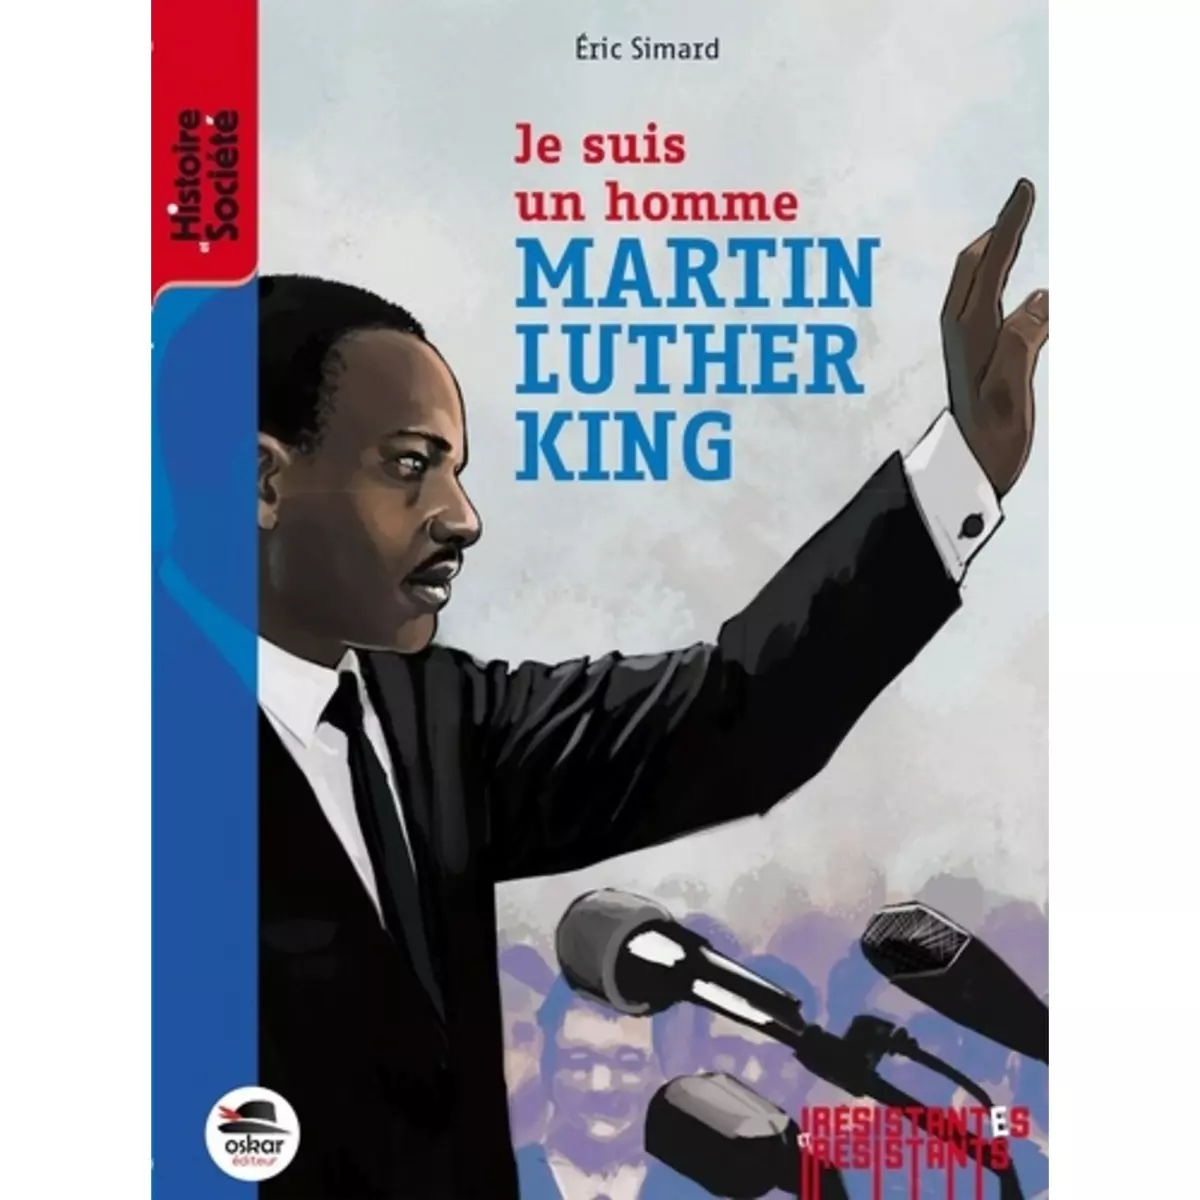  JE SUIS UN HOMME - MARTIN LUTHER KING, Simard Eric